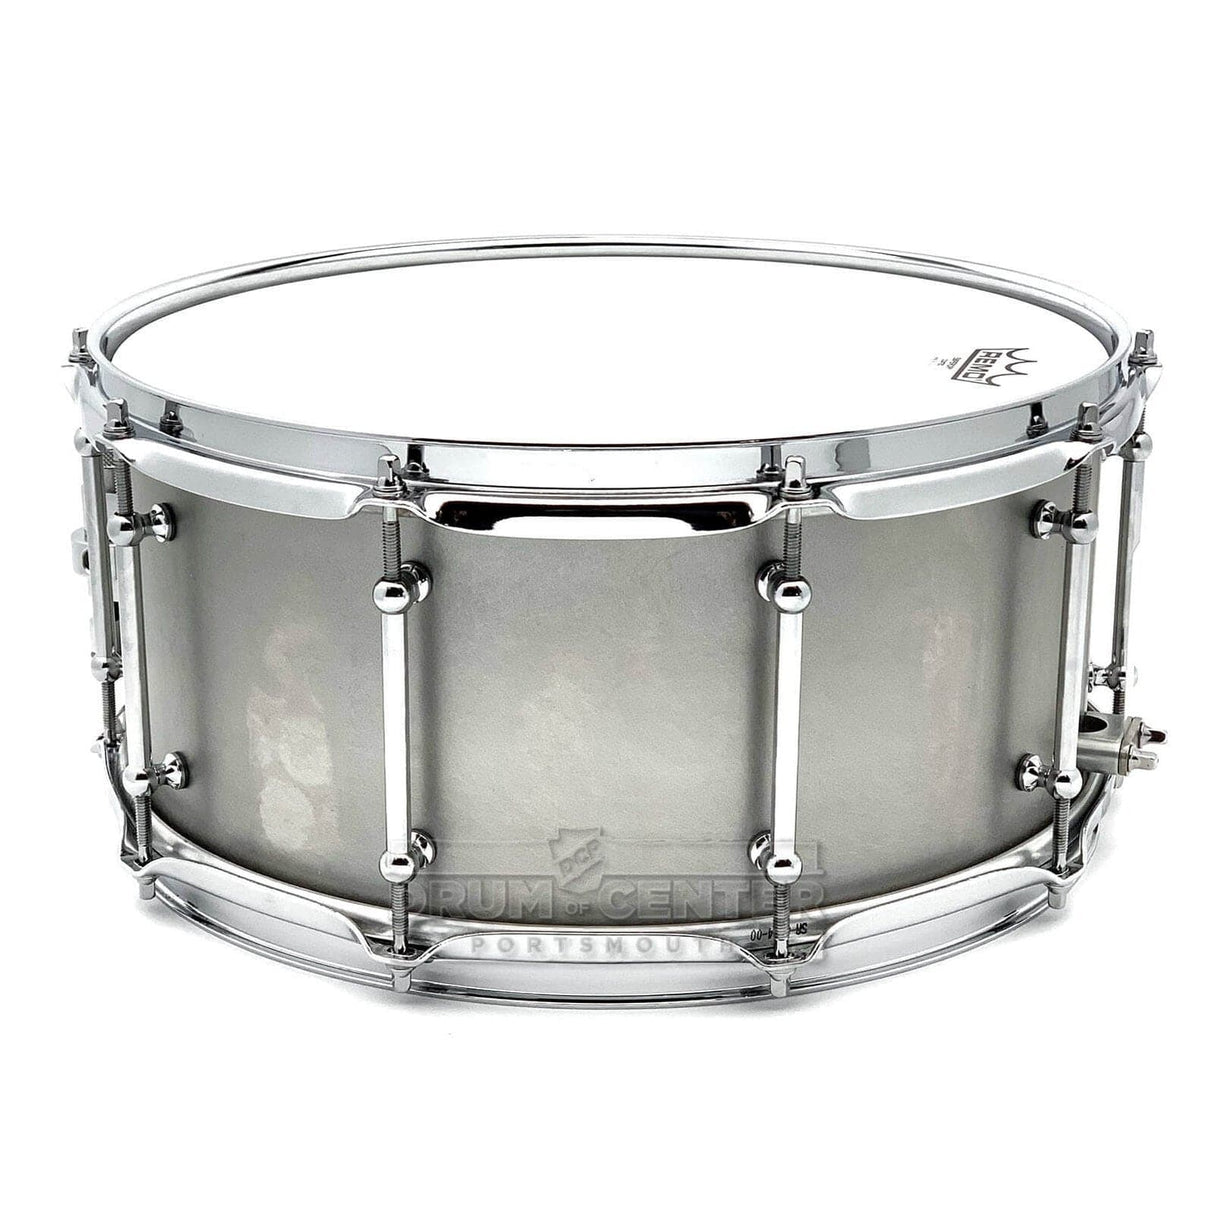 Keplinger Stainless Steel Snare Drum 14x6.5 w/Trick Throwoff